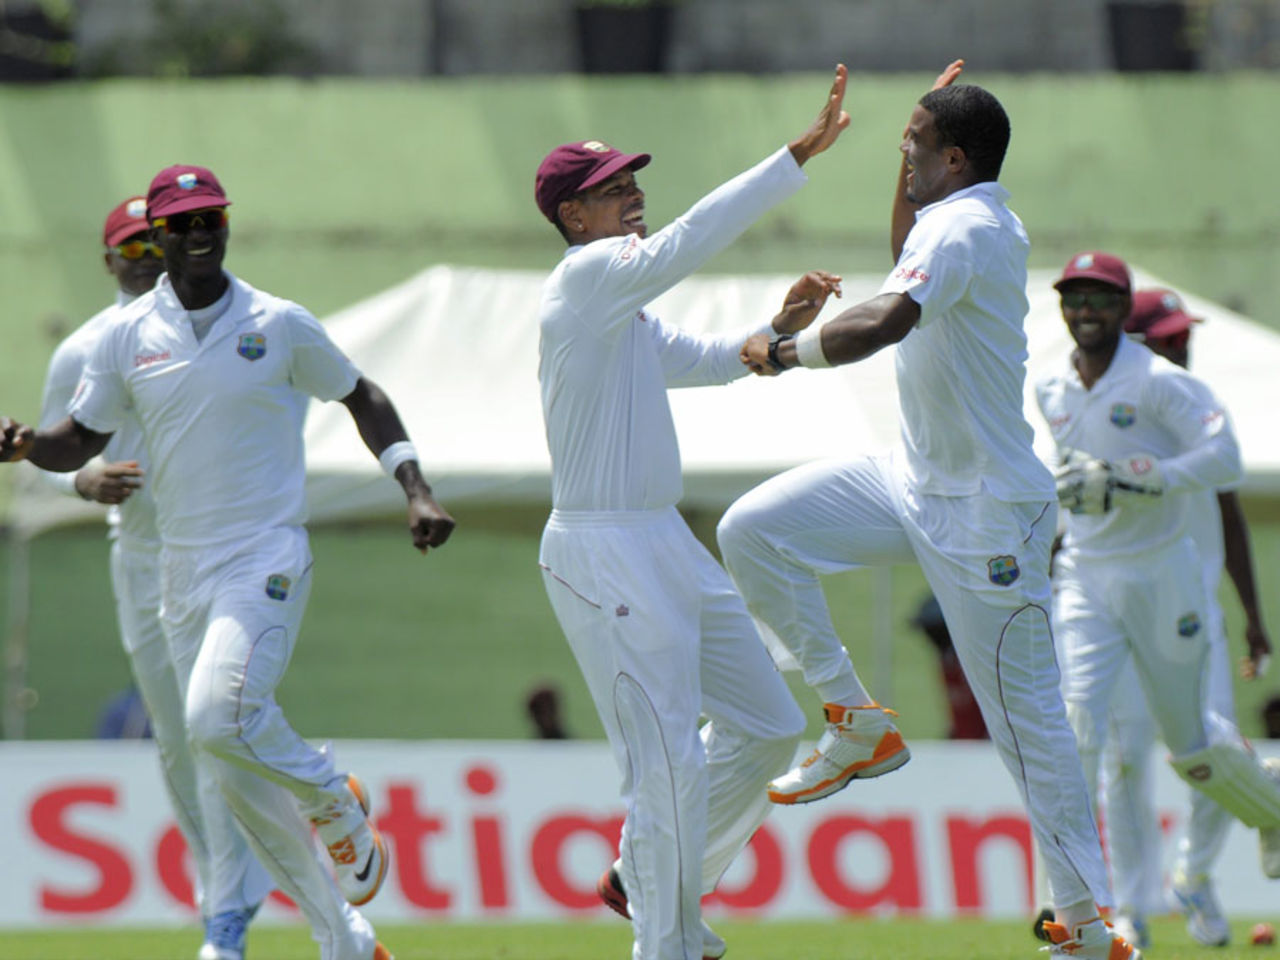 Shannon Gabriel celebrates one of his two early wickets, West Indies v Zimbabwe, 2nd Test, Roseau, 1st day, March 20, 2013